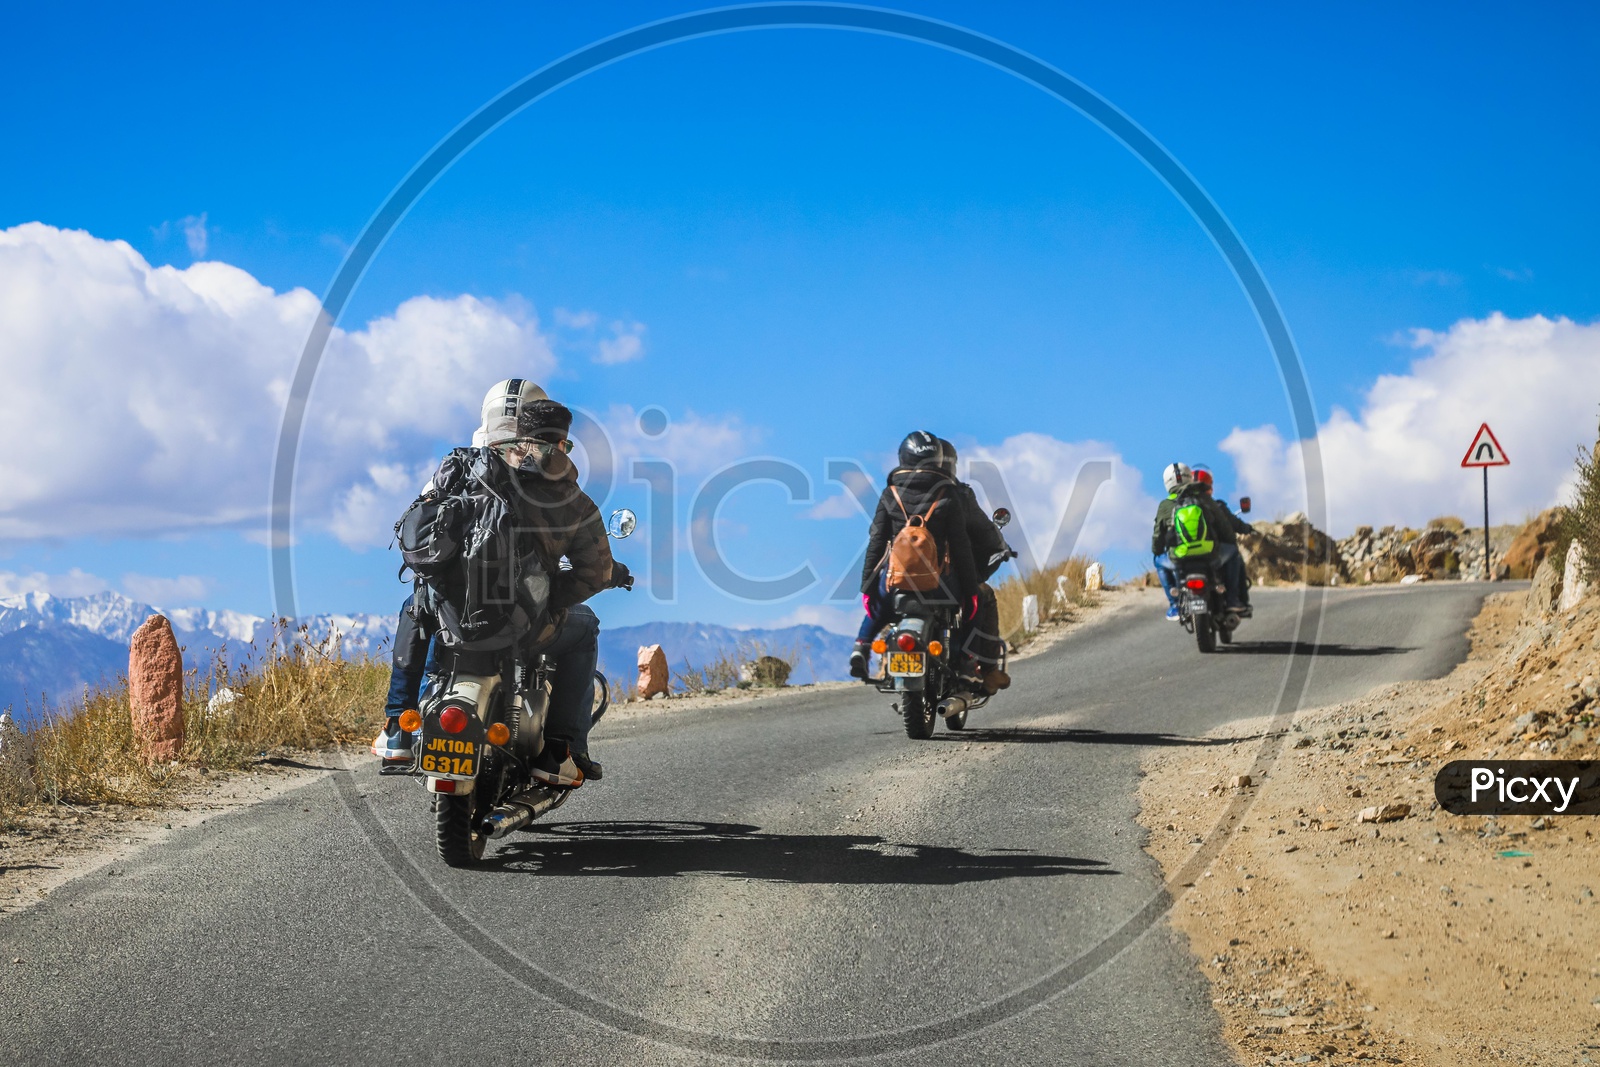 Travellers on three motorcycles by the roadway through the hills